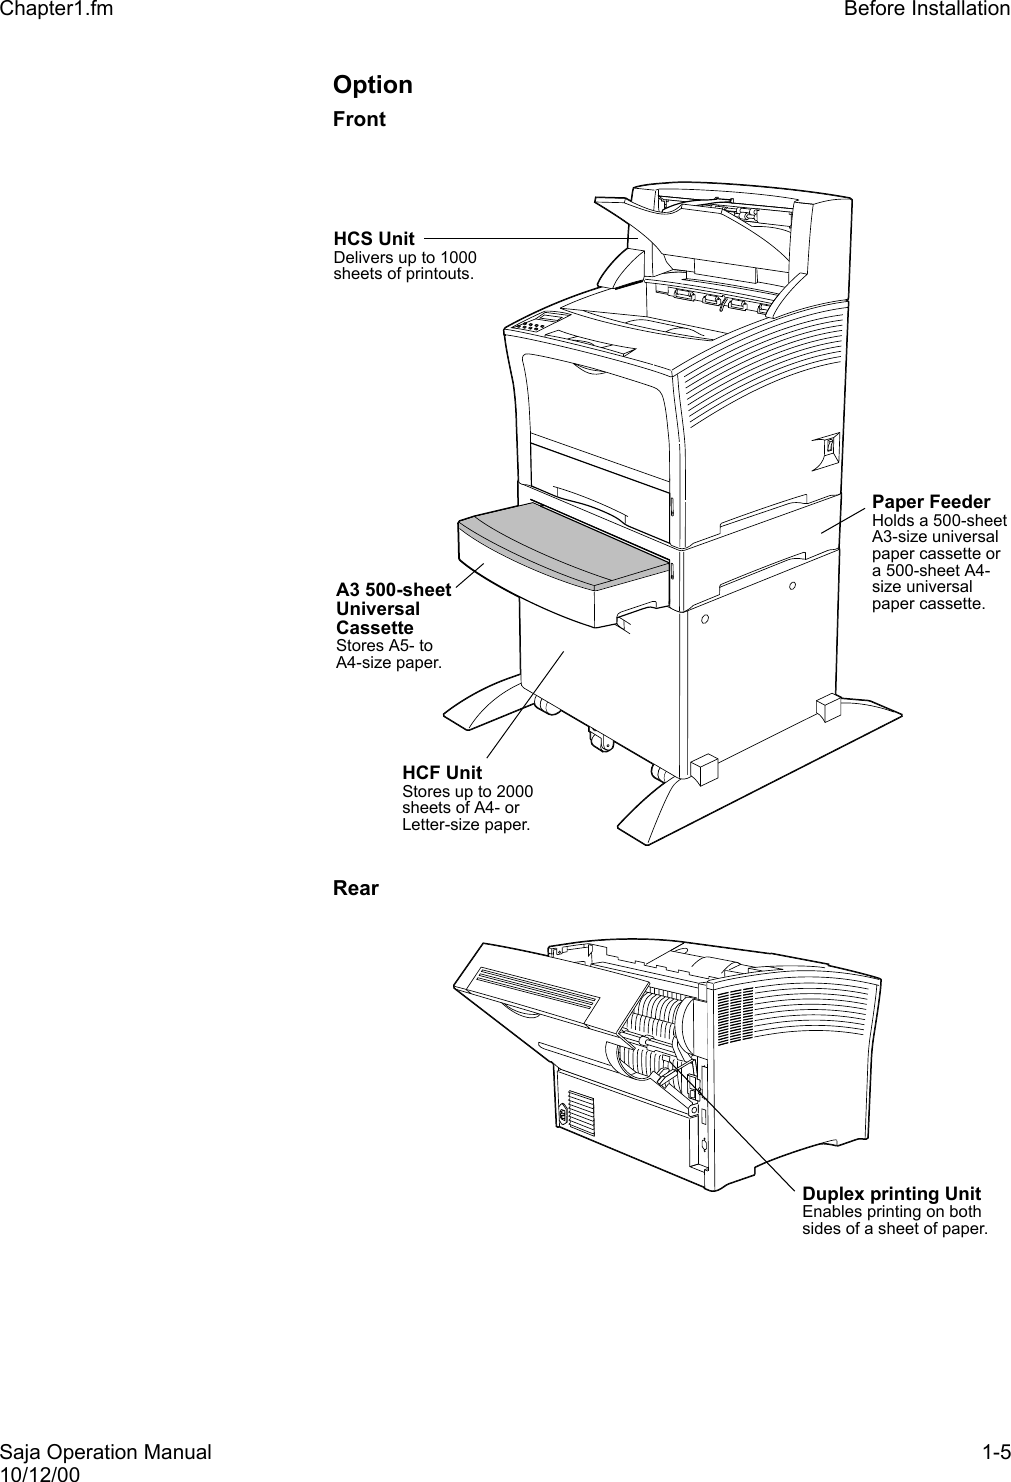 Saja Operation Manual 1-510/12/00Chapter1.fm Before InstallationOptionFrontRearHCS UnitDelivers up to 1000 sheets of printouts.Paper FeederHolds a 500-sheet A3-size universal paper cassette or a 500-sheet A4-size universal paper cassette.HCF UnitStores up to 2000 sheets of A4- or Letter-size paper.A3 500-sheet Universal CassetteStores A5- to A4-size paper.Duplex printing UnitEnables printing on both sides of a sheet of paper.